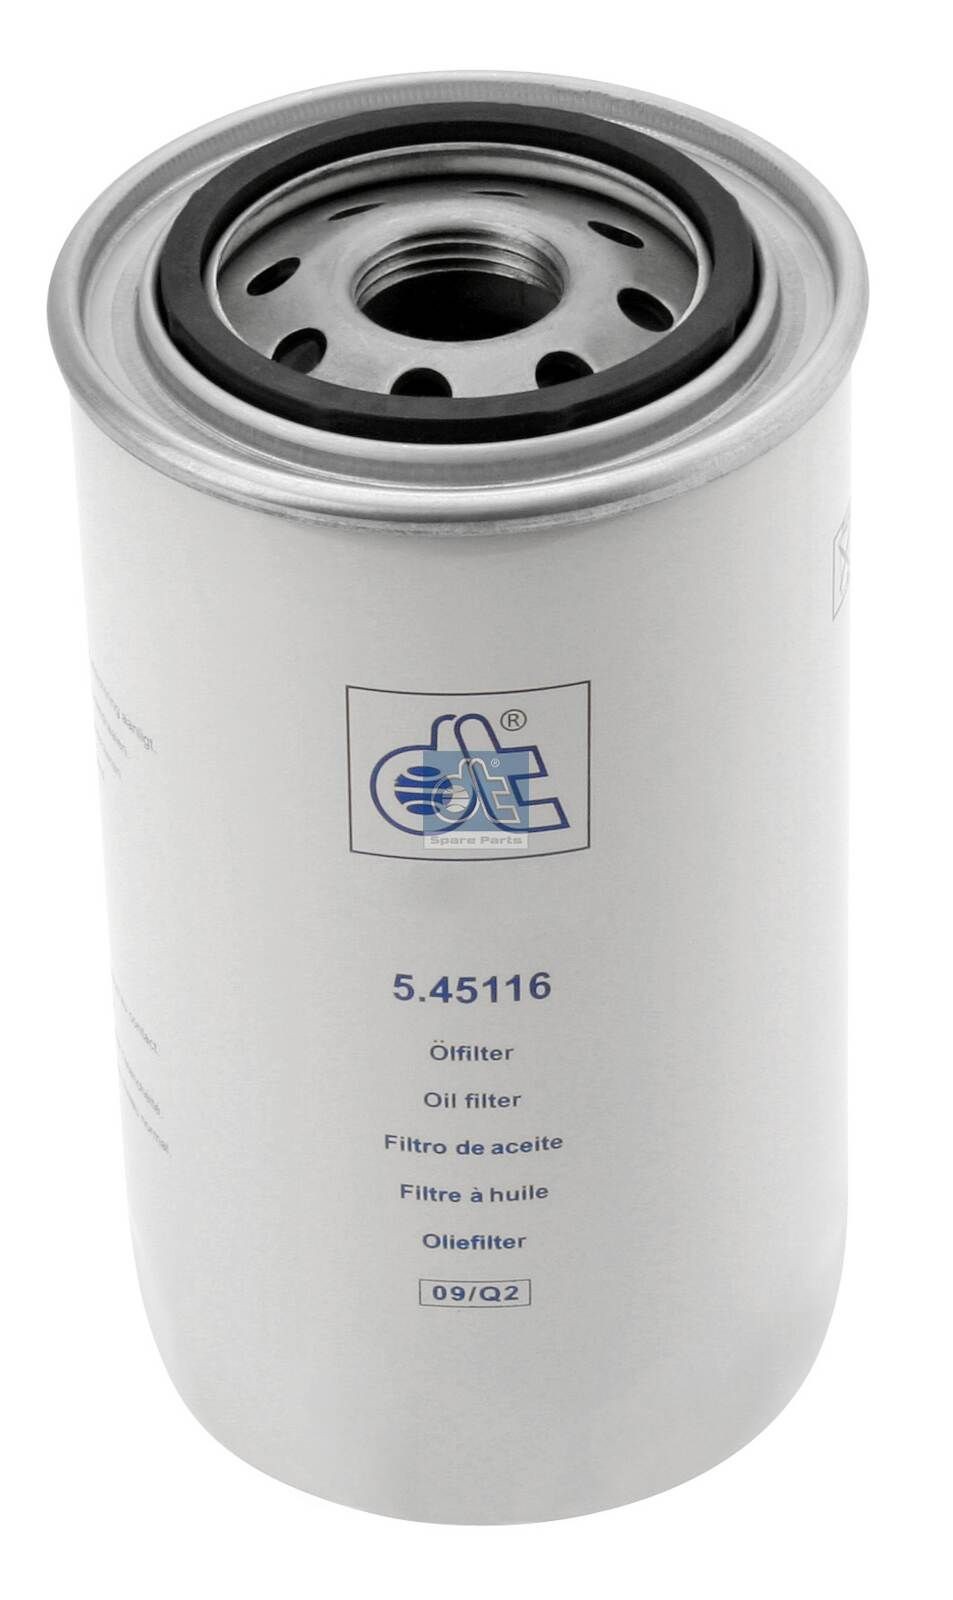 H19W10 DT Spare Parts 5.45116 Oil filter 8780 3260